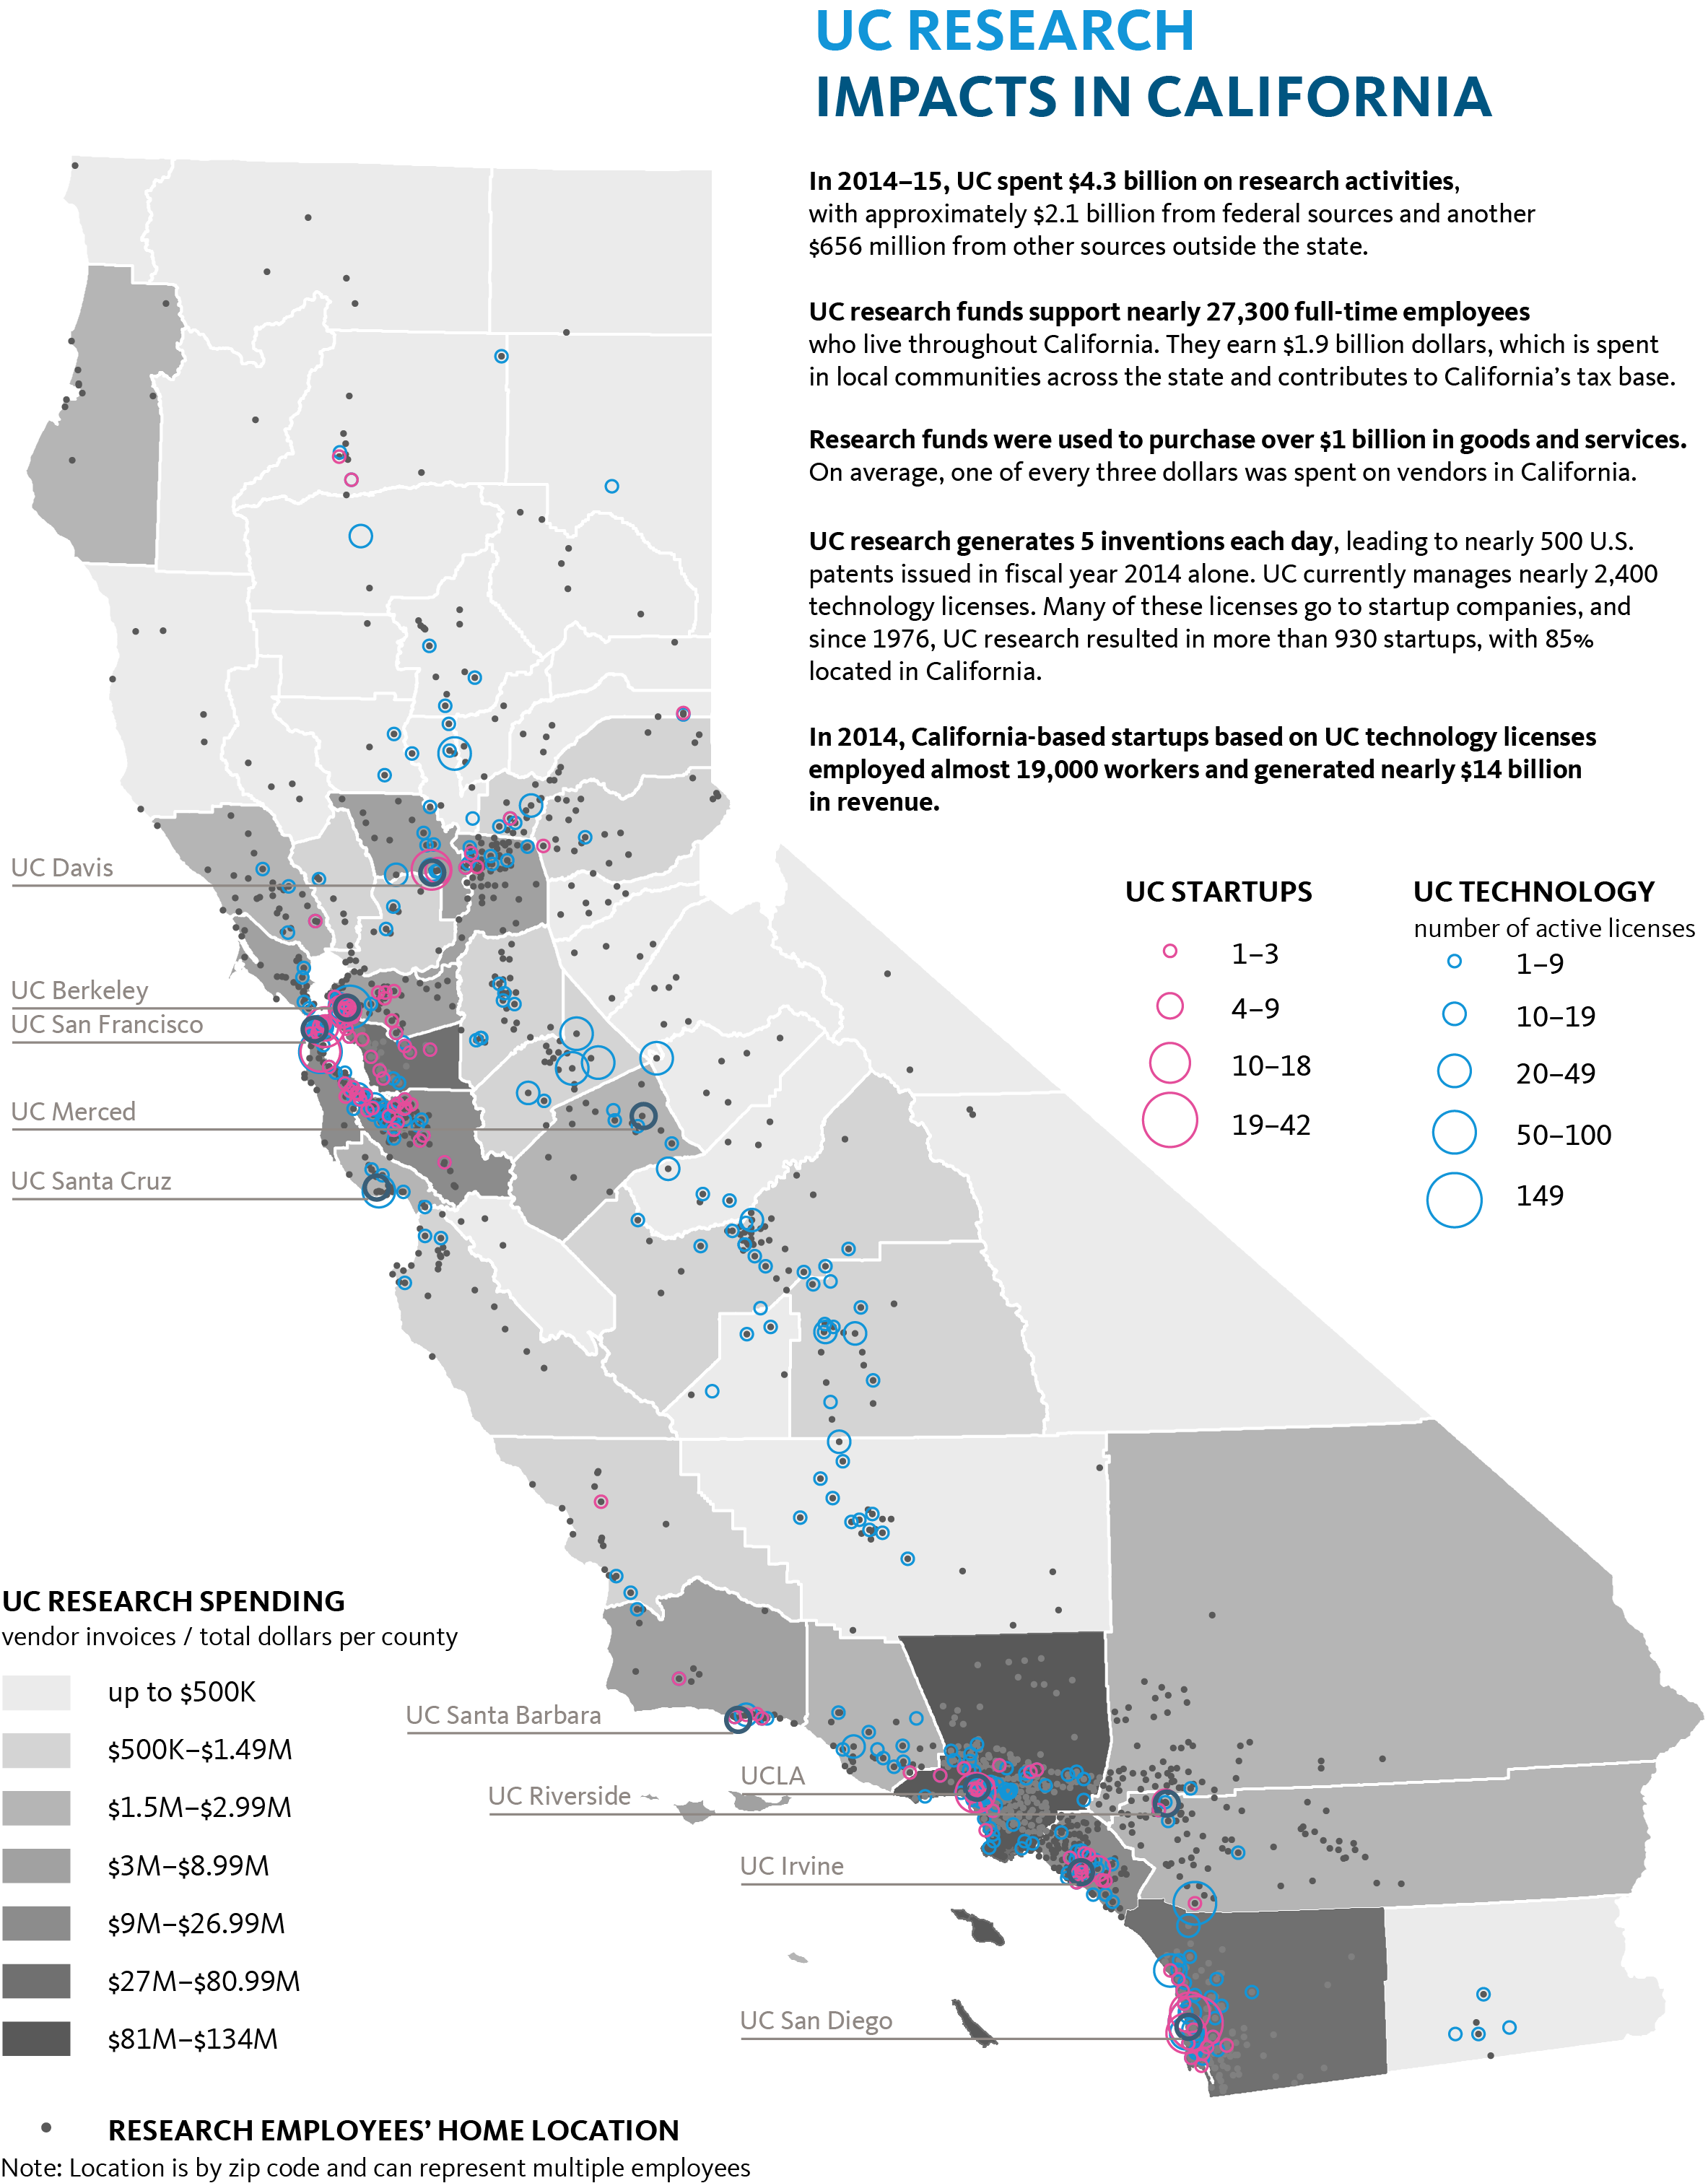 Research activity impact in California